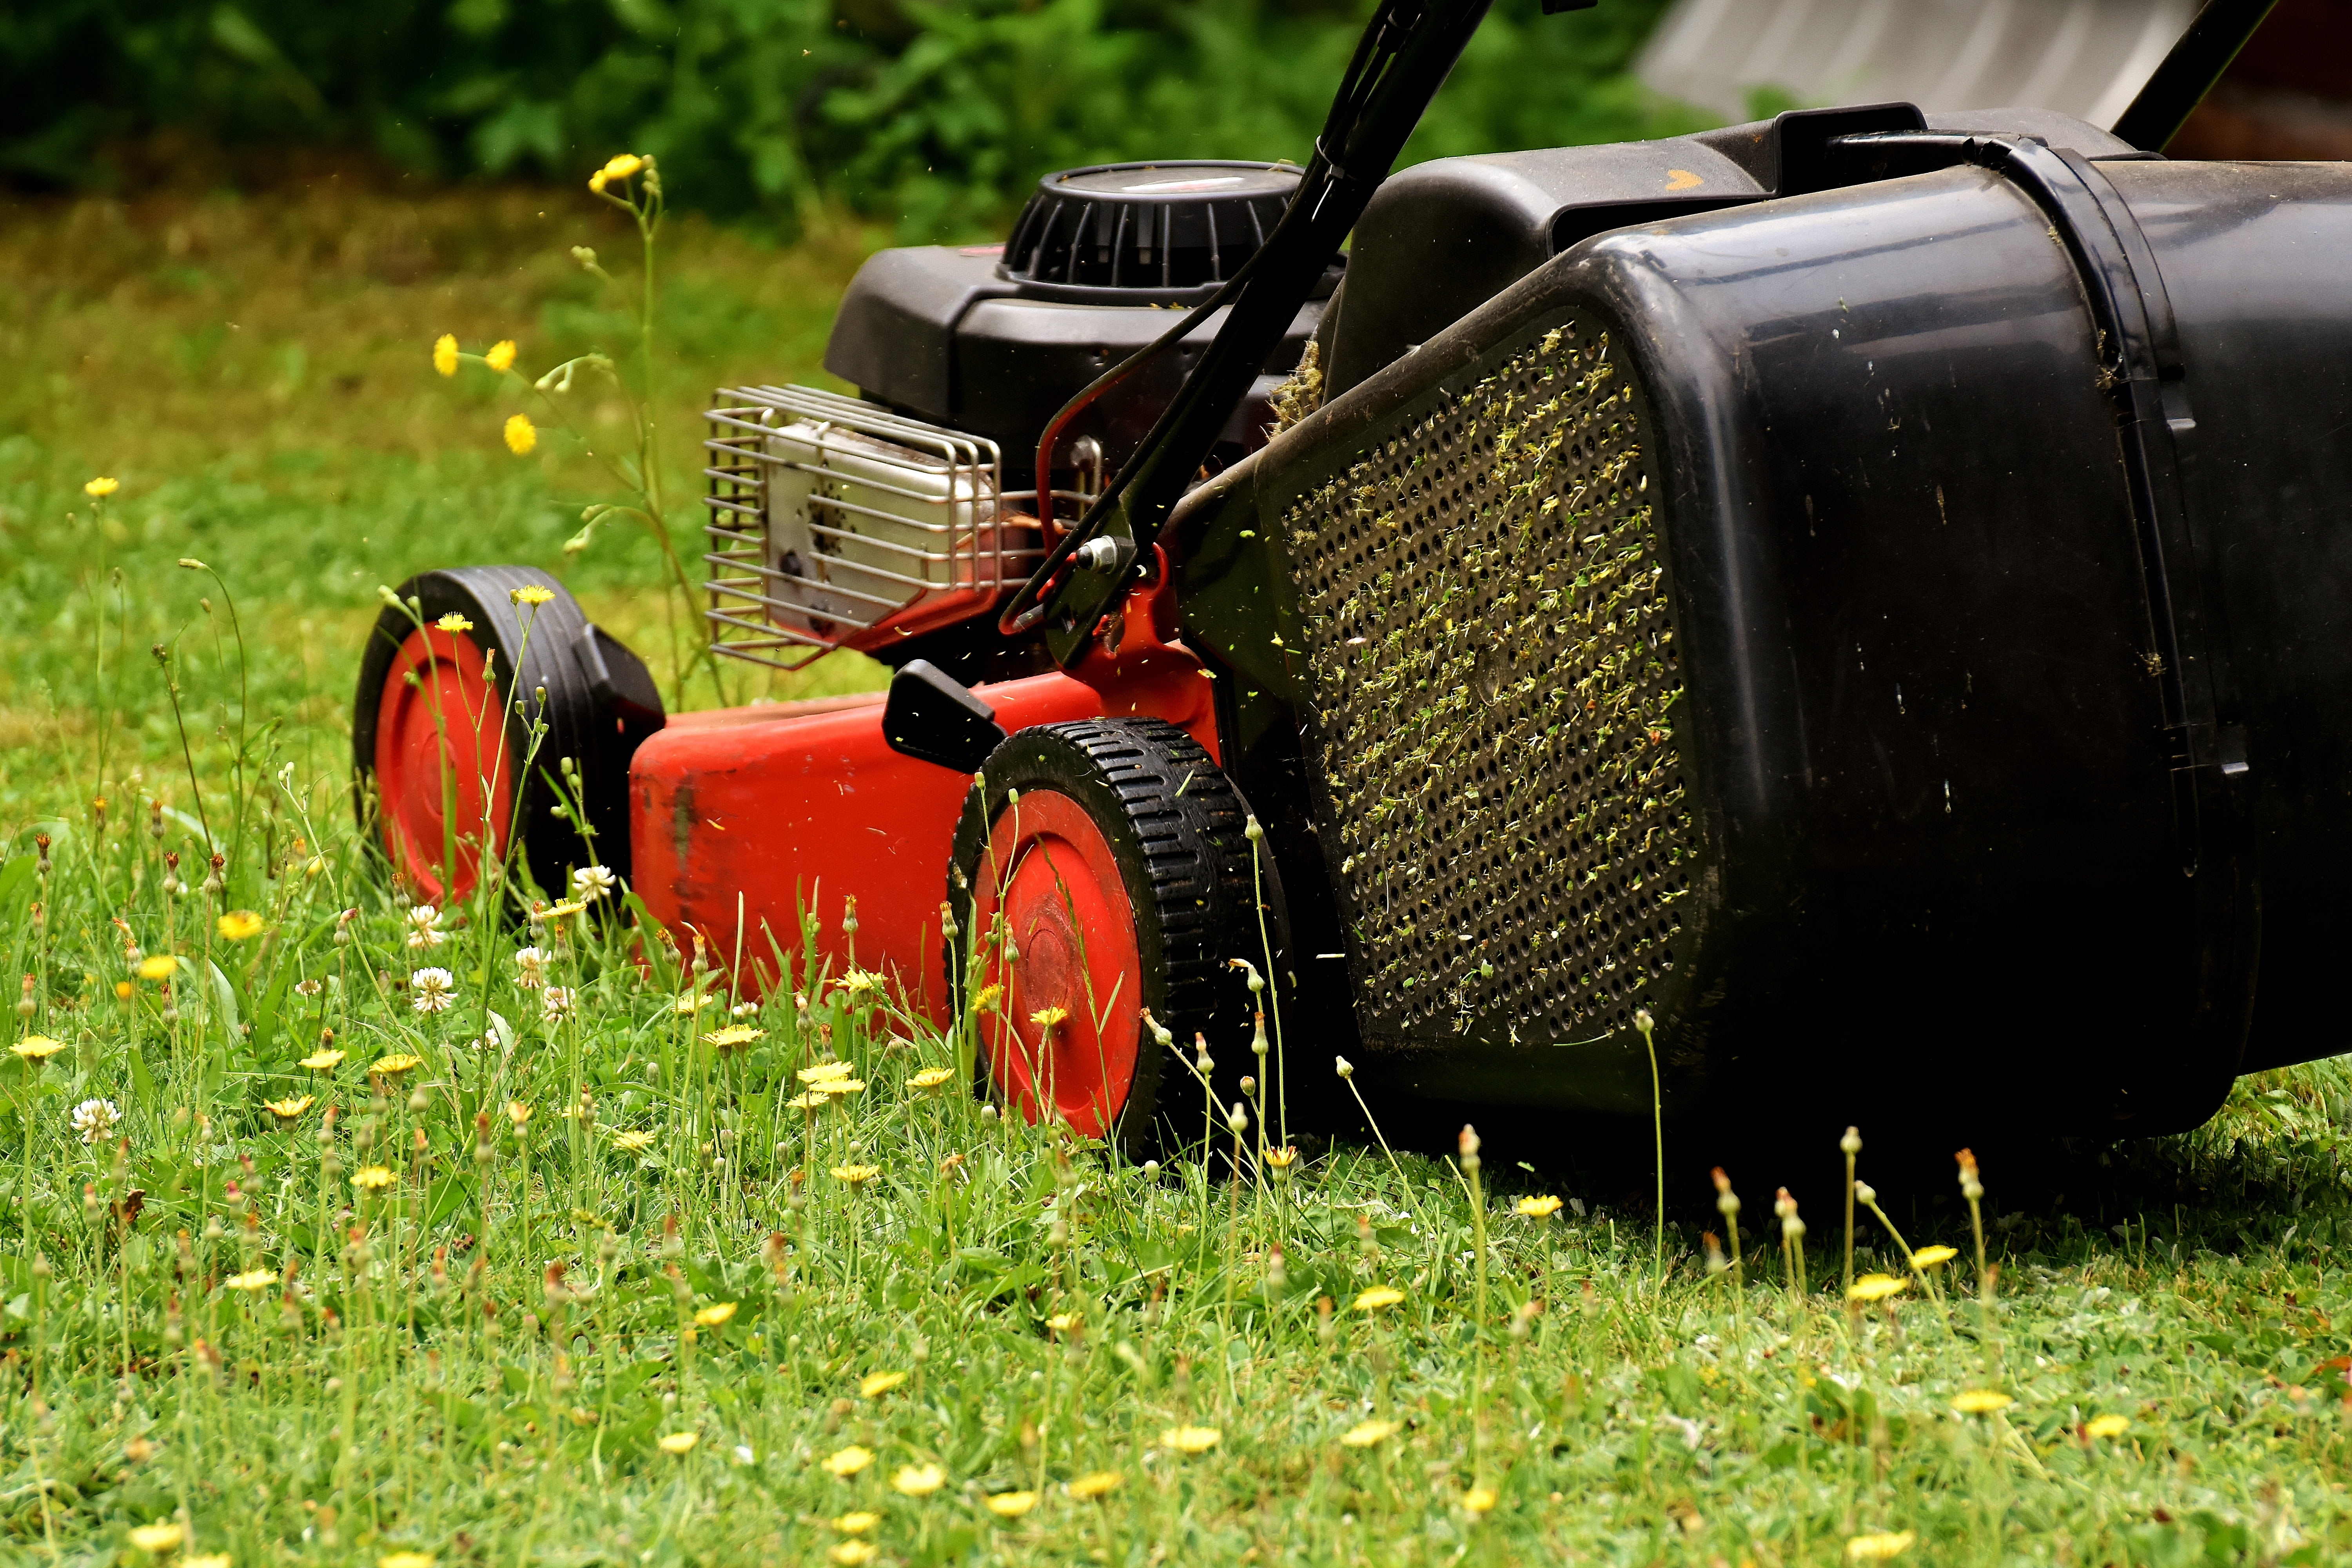 red and black lawn mower, lawn mowing, green, meadow, gardening